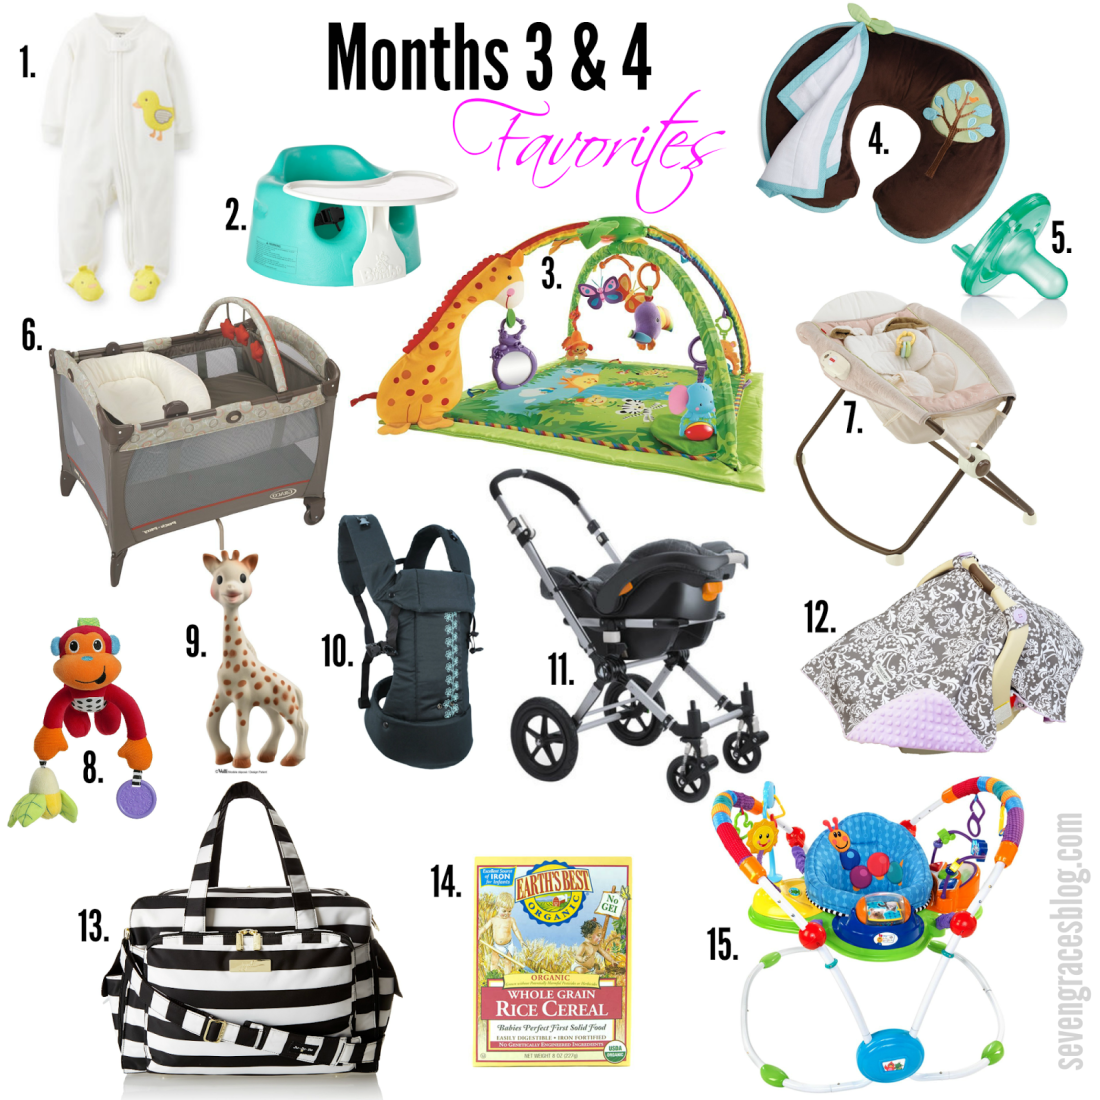 Top 15 Baby Items for Months 3 & 4 Seven Graces